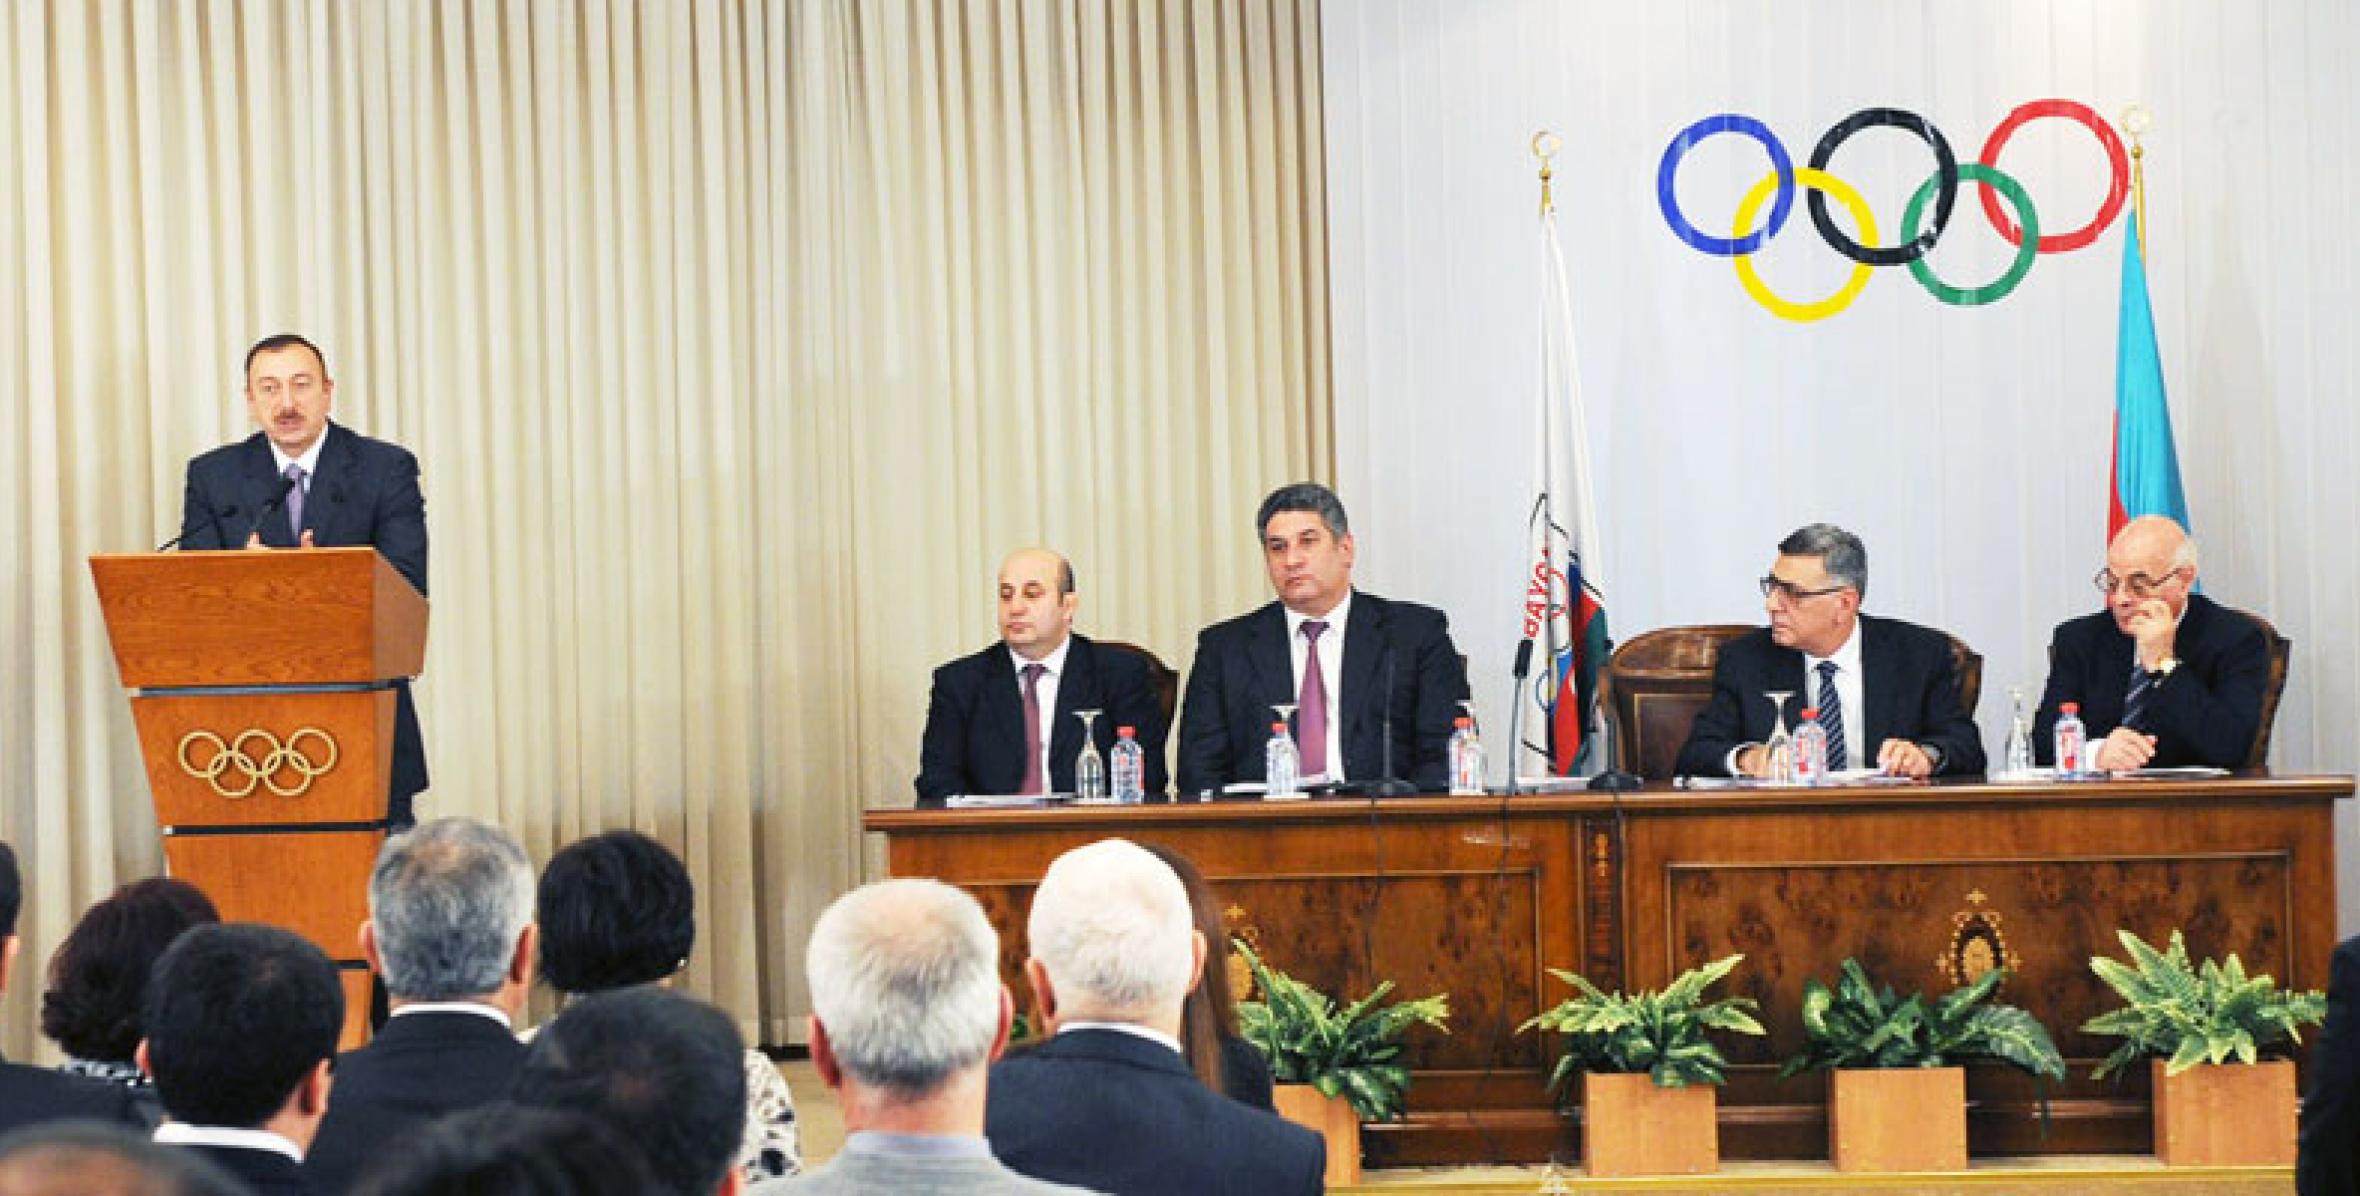 Speech by Ilham Aliyev at the ceremony held at the National Olympic Committee to award sportsmen and coaches